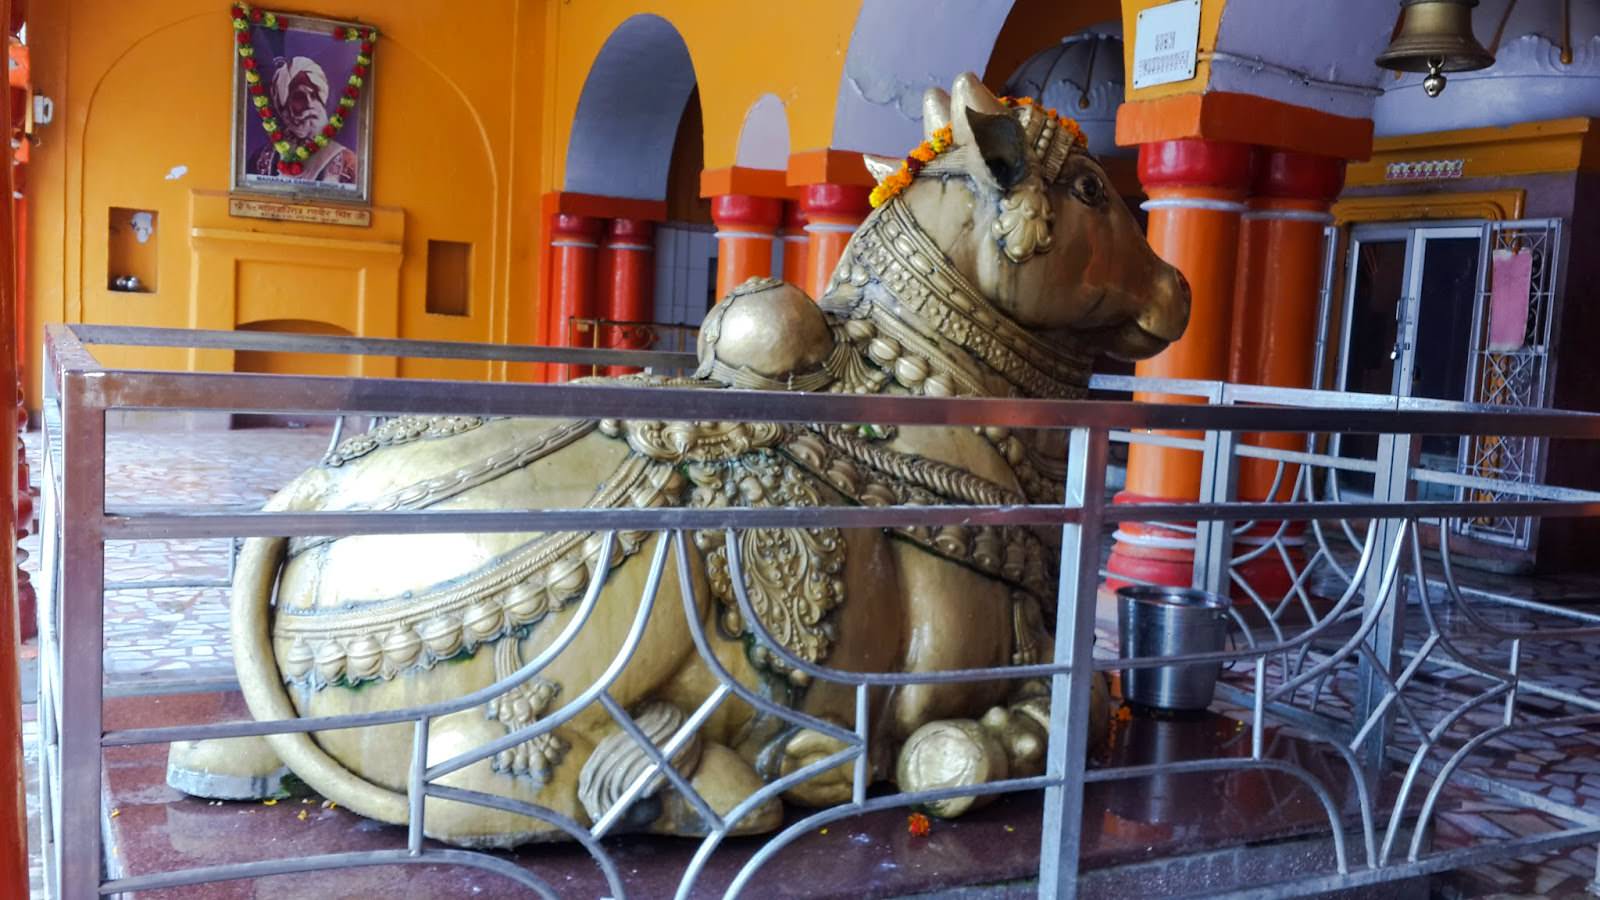 Nandi idol at Ranbireshwar Temple and The idol of nandi is made of brass and weighs around 1000 kg